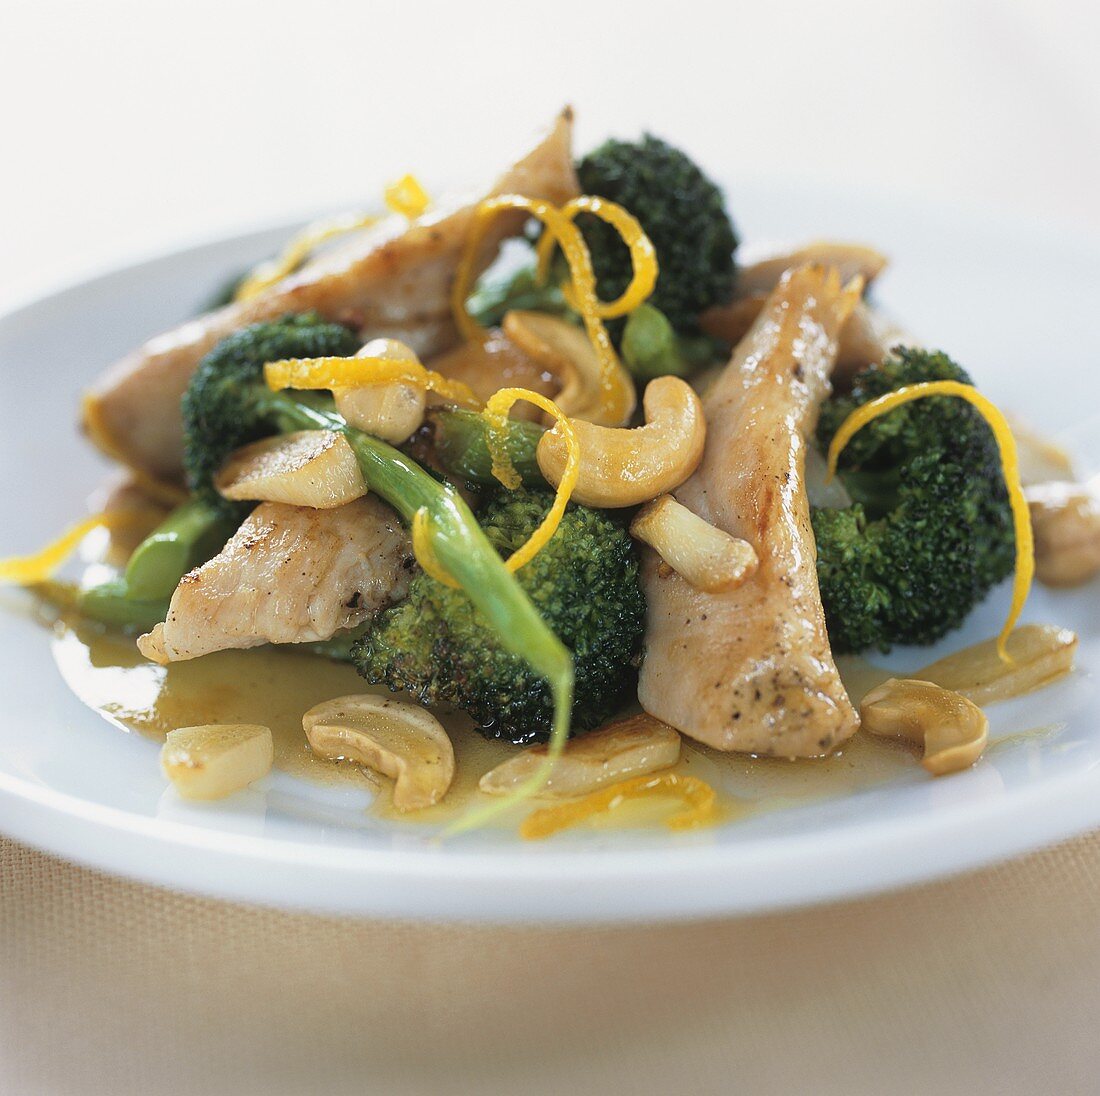 Fried chicken strips with broccoli and cashew nuts